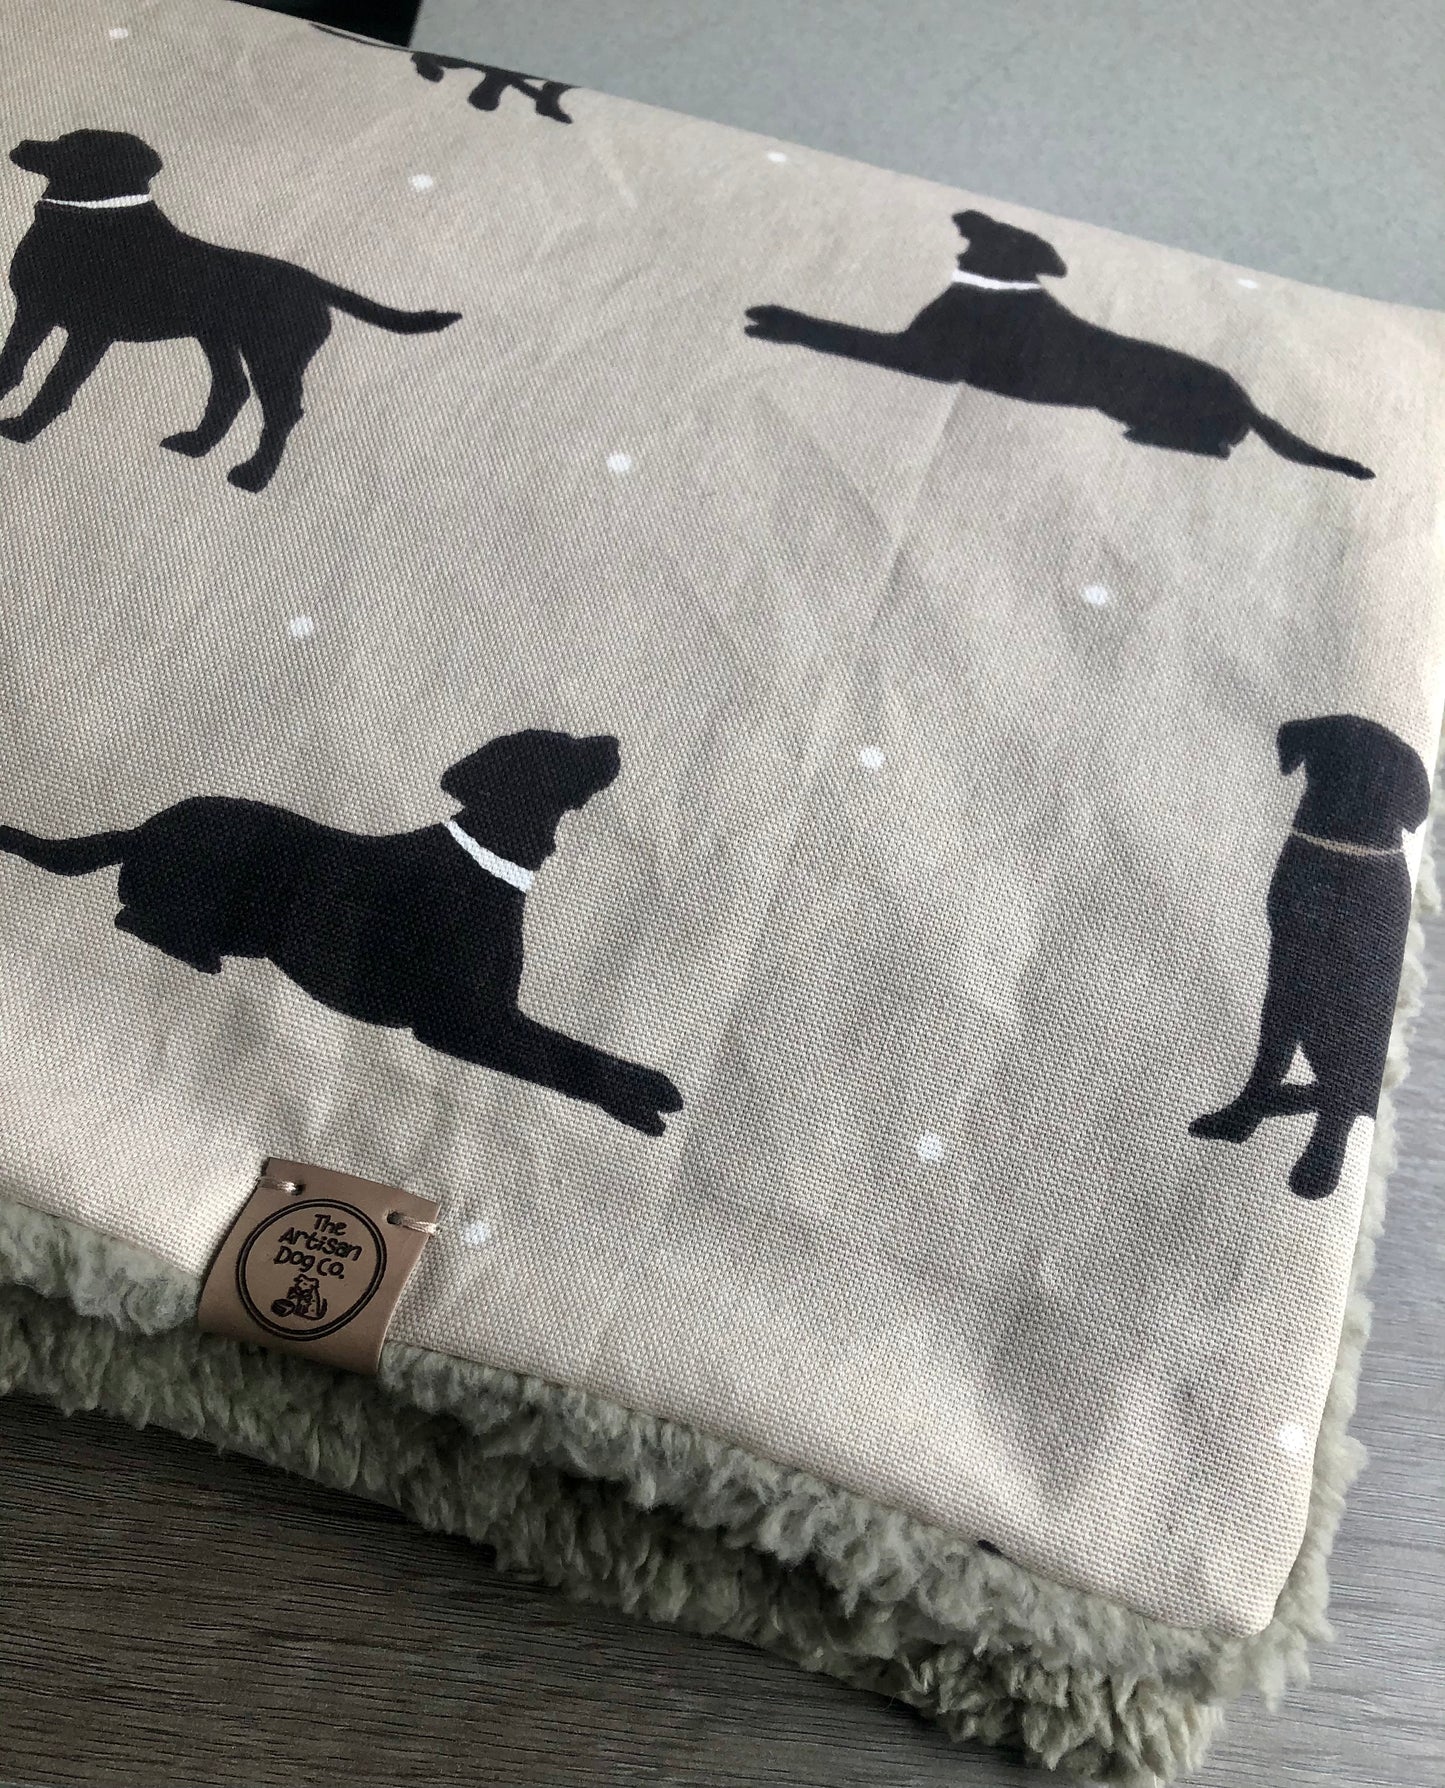 Handcrafted Luxury Dog Blanket - The Walter Collection Dog Print